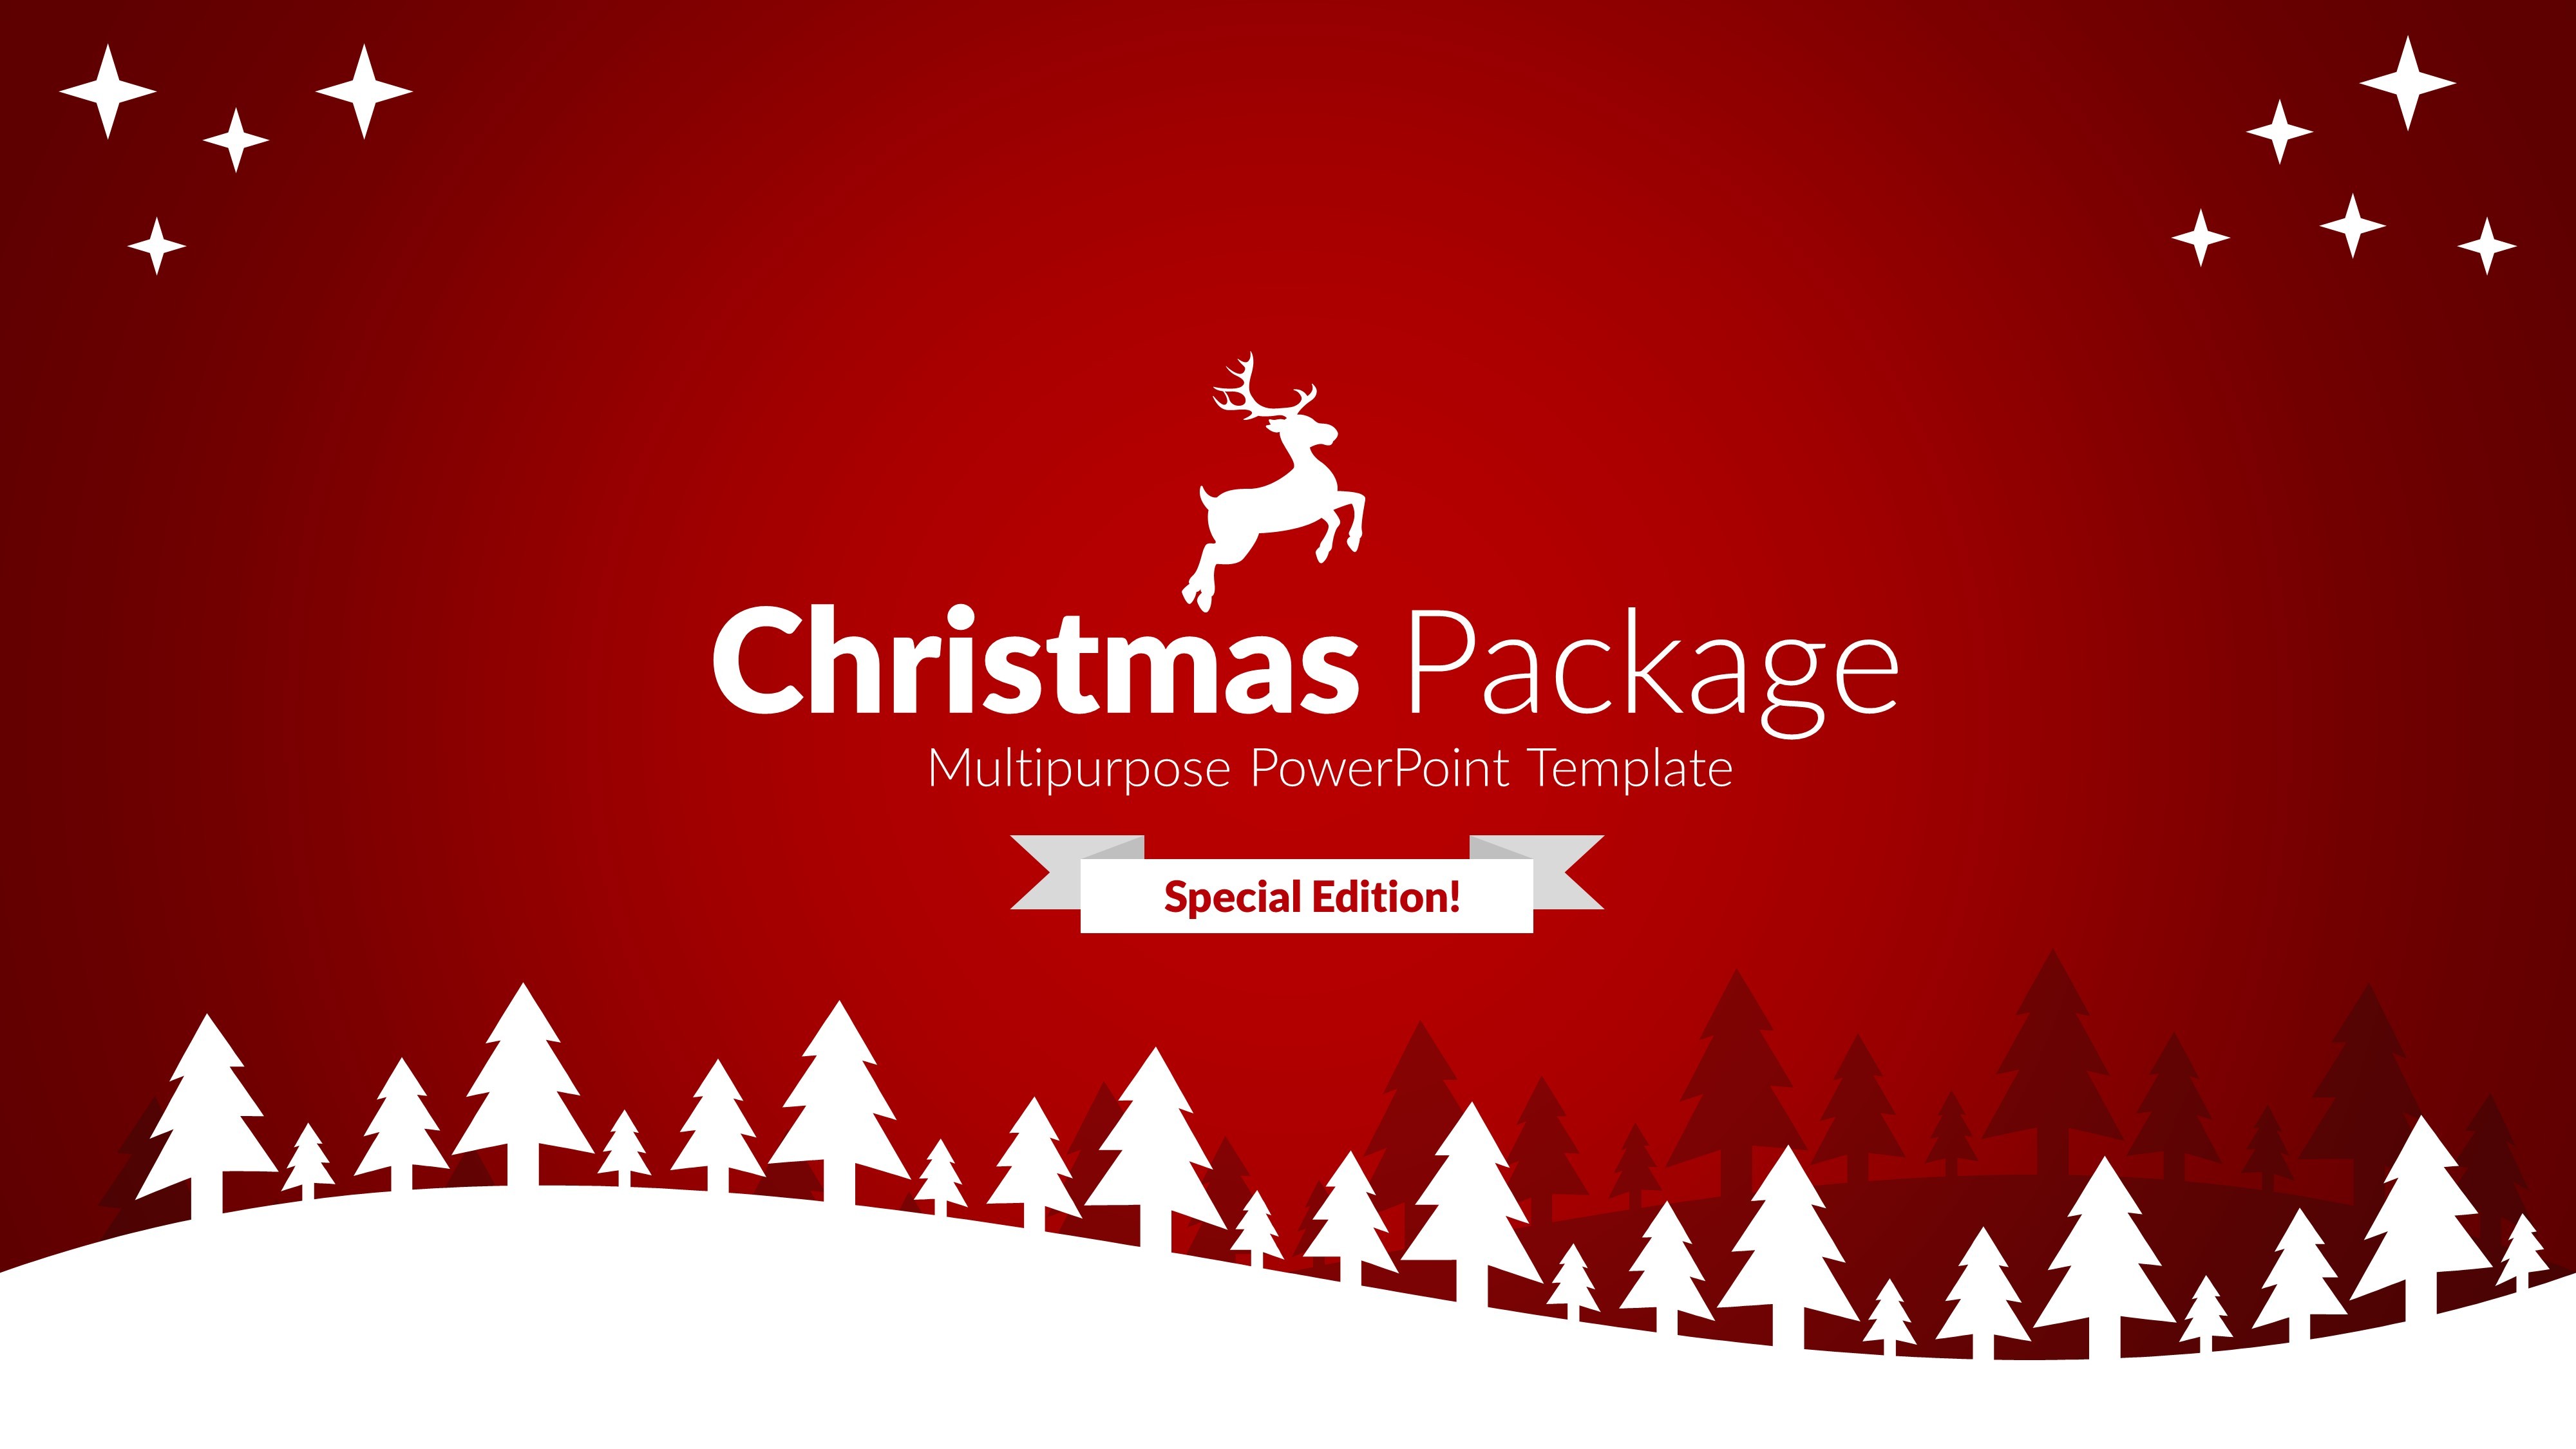 Top 50 Best PowerPoint Templates November 2017 Powerpoint Christmas Theme